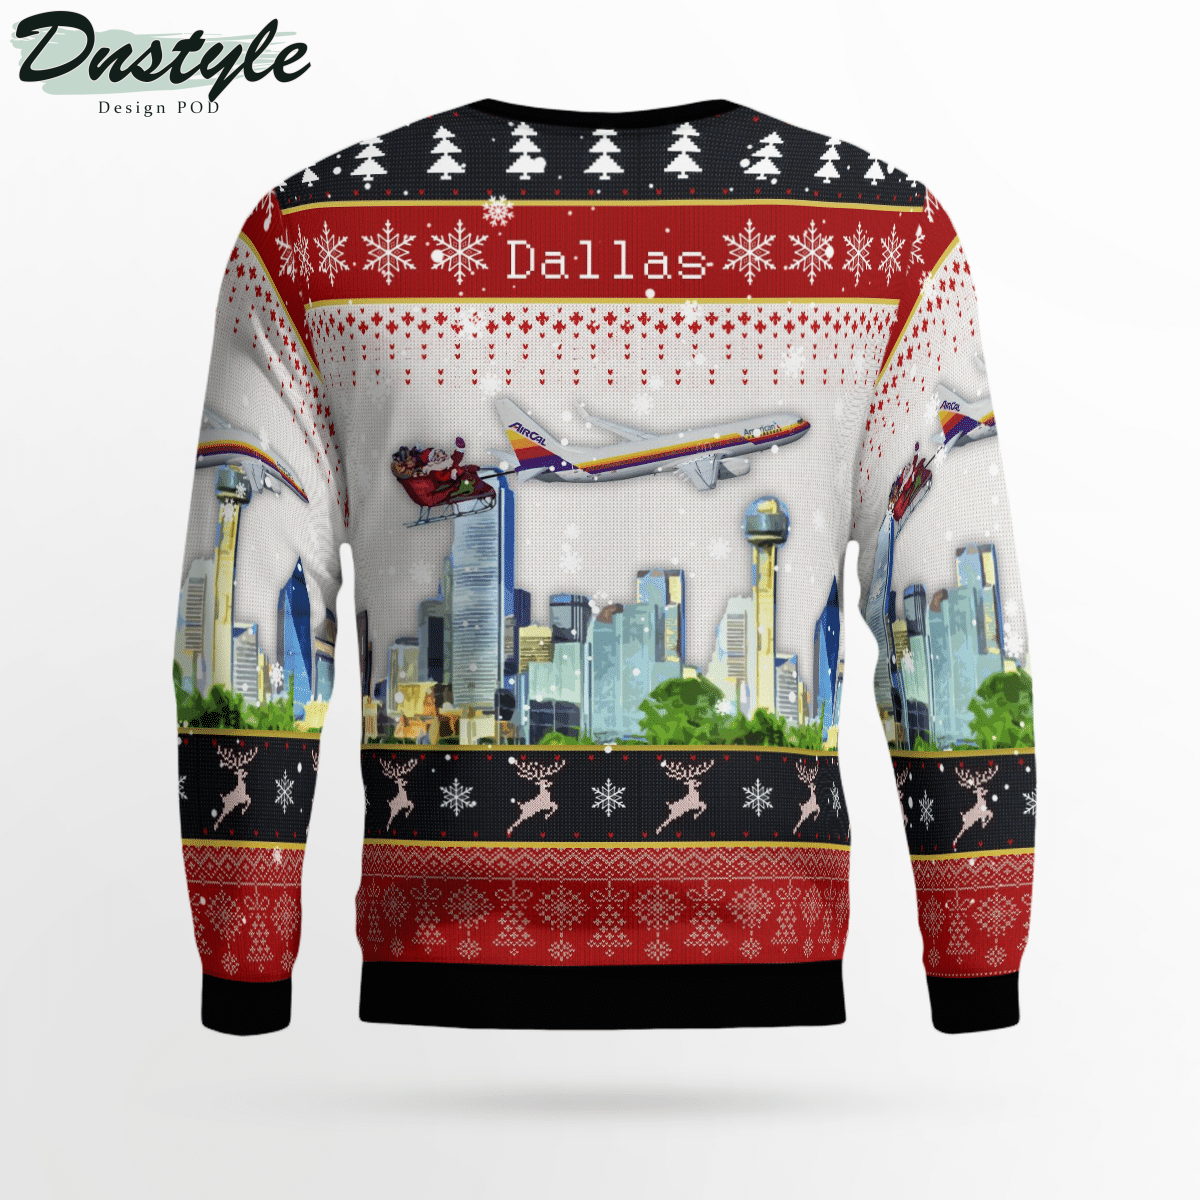 American Airlines Air Cal Heritage With Santa Over Dallas Ugly Christmas Sweater